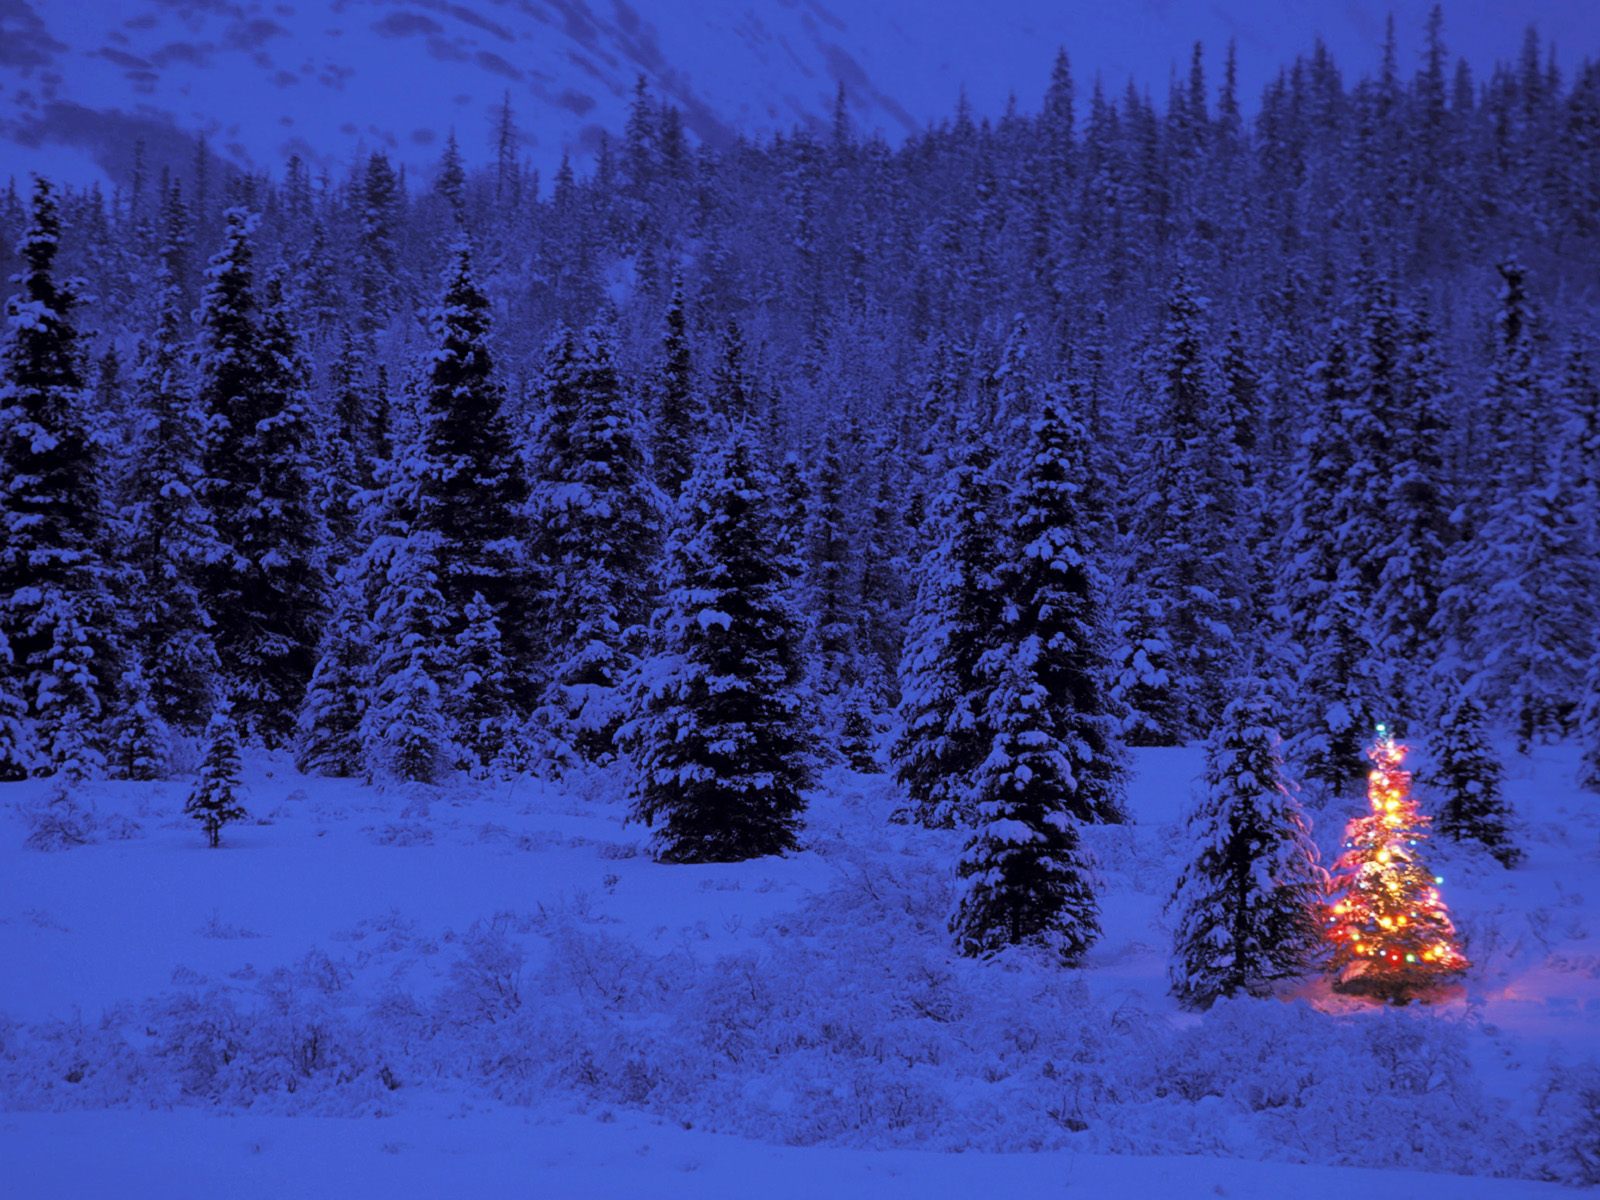 Snow-covered Christmas tree shining amidst a wintry forest